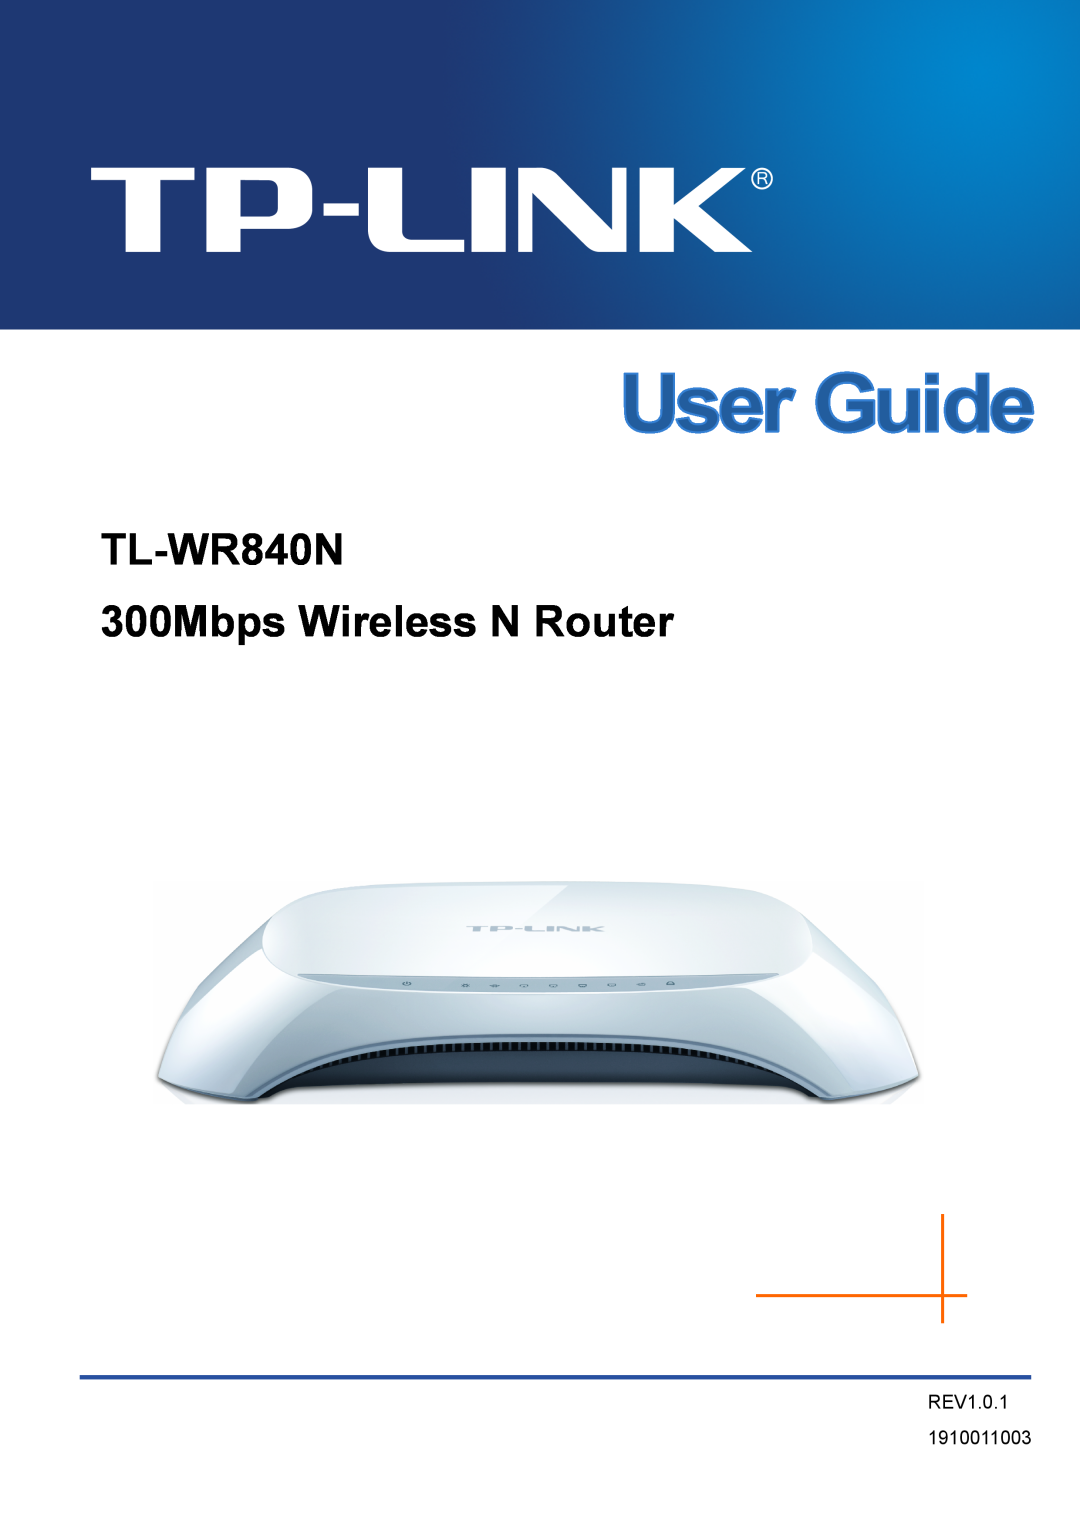 TP-Link manual TL-WR840N 300Mbps Wireless N Router, REV1.0.1 1910011003 